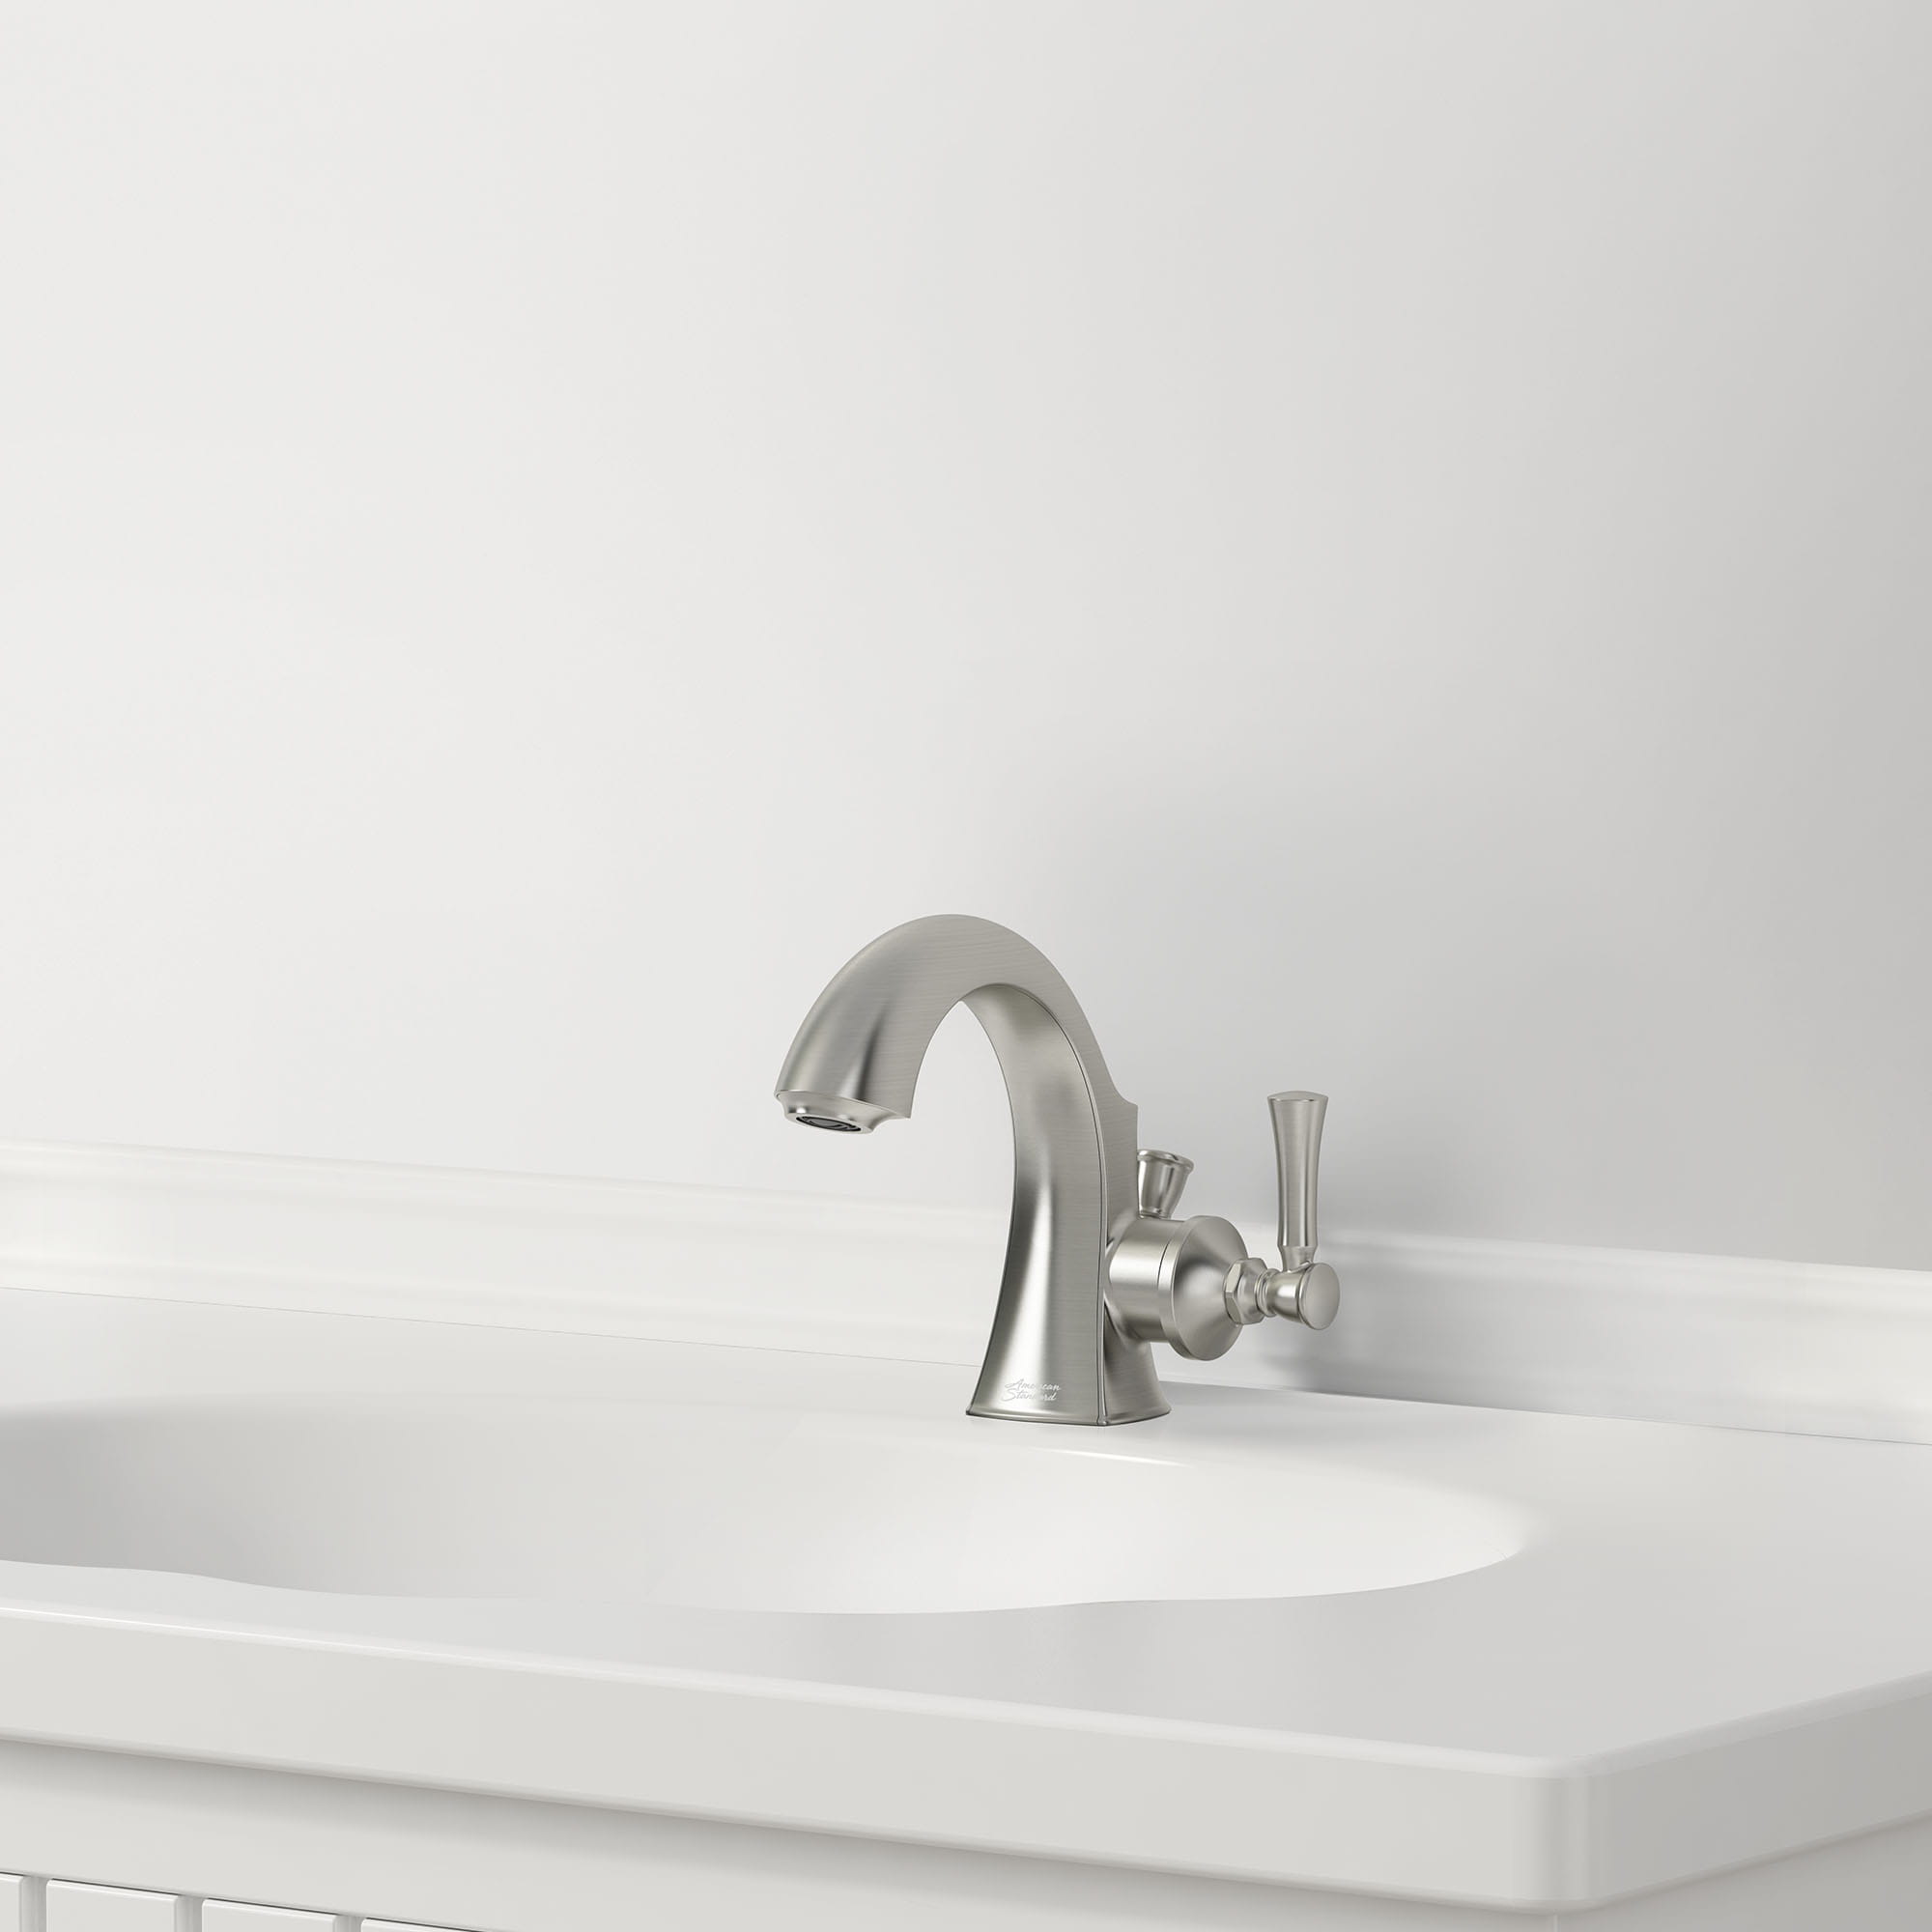 Chancellor 4 In Centerset Single Handle  Bathroom Faucet 12 GPM with Lever Handle   BRUSHED NICKEL